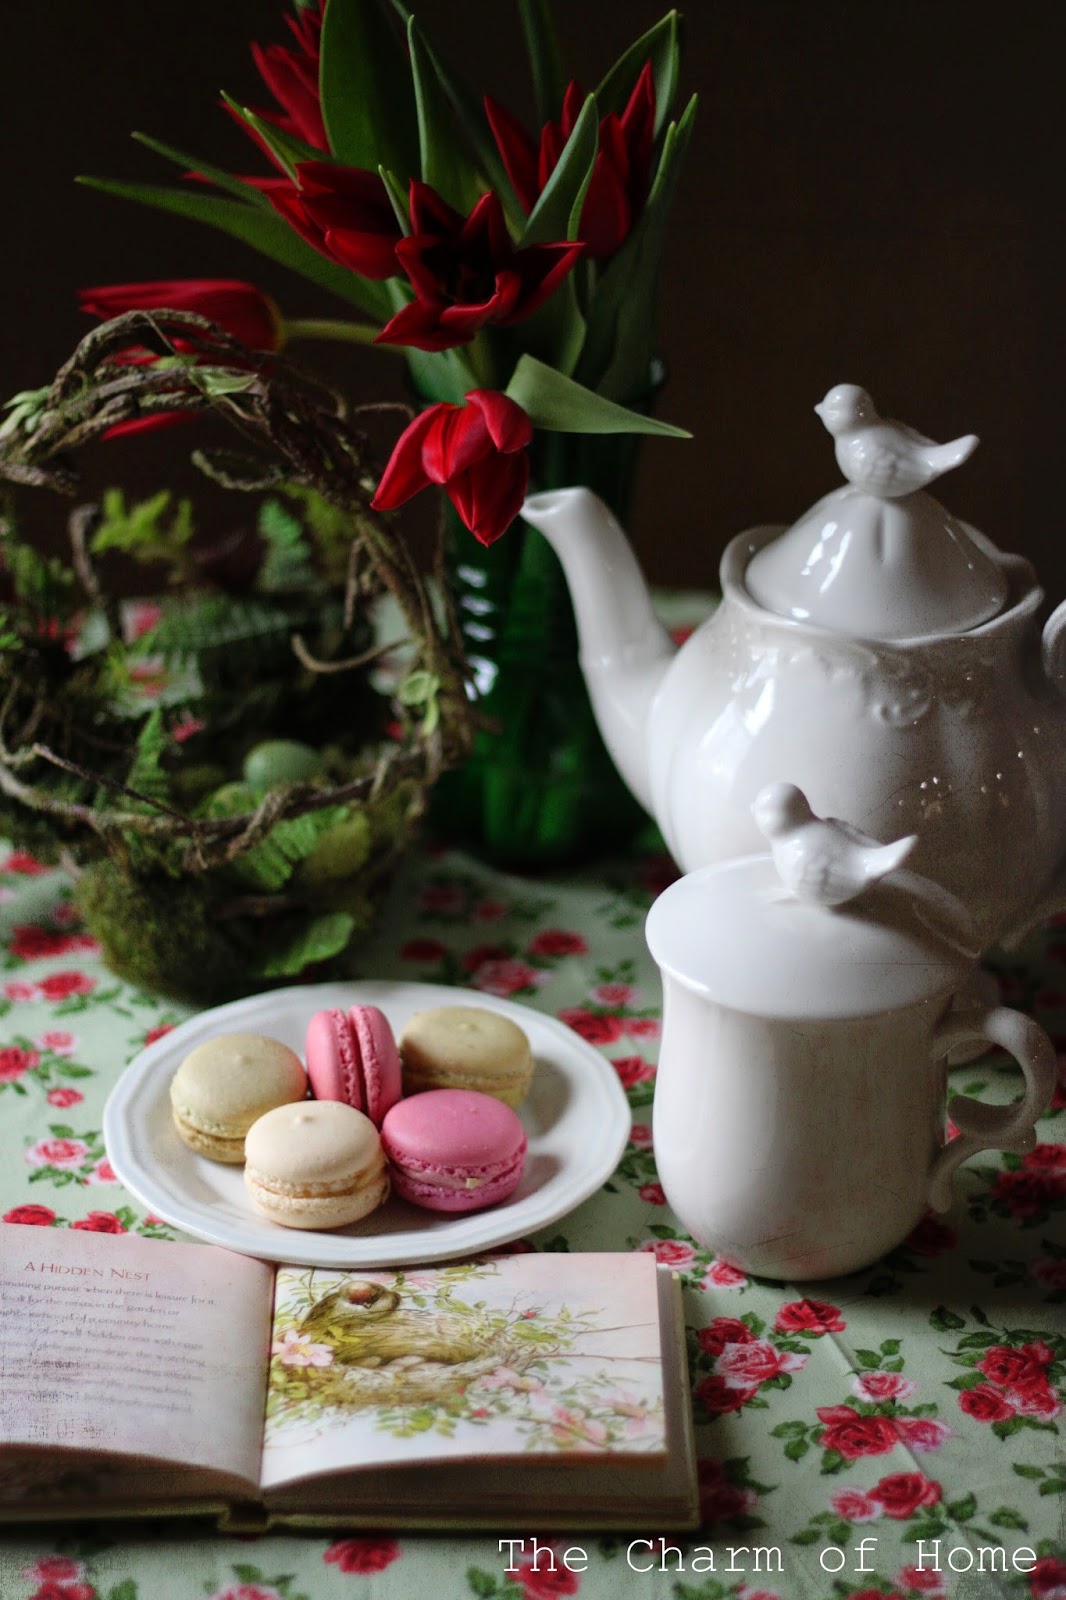 Spring tea: The Charm of Home